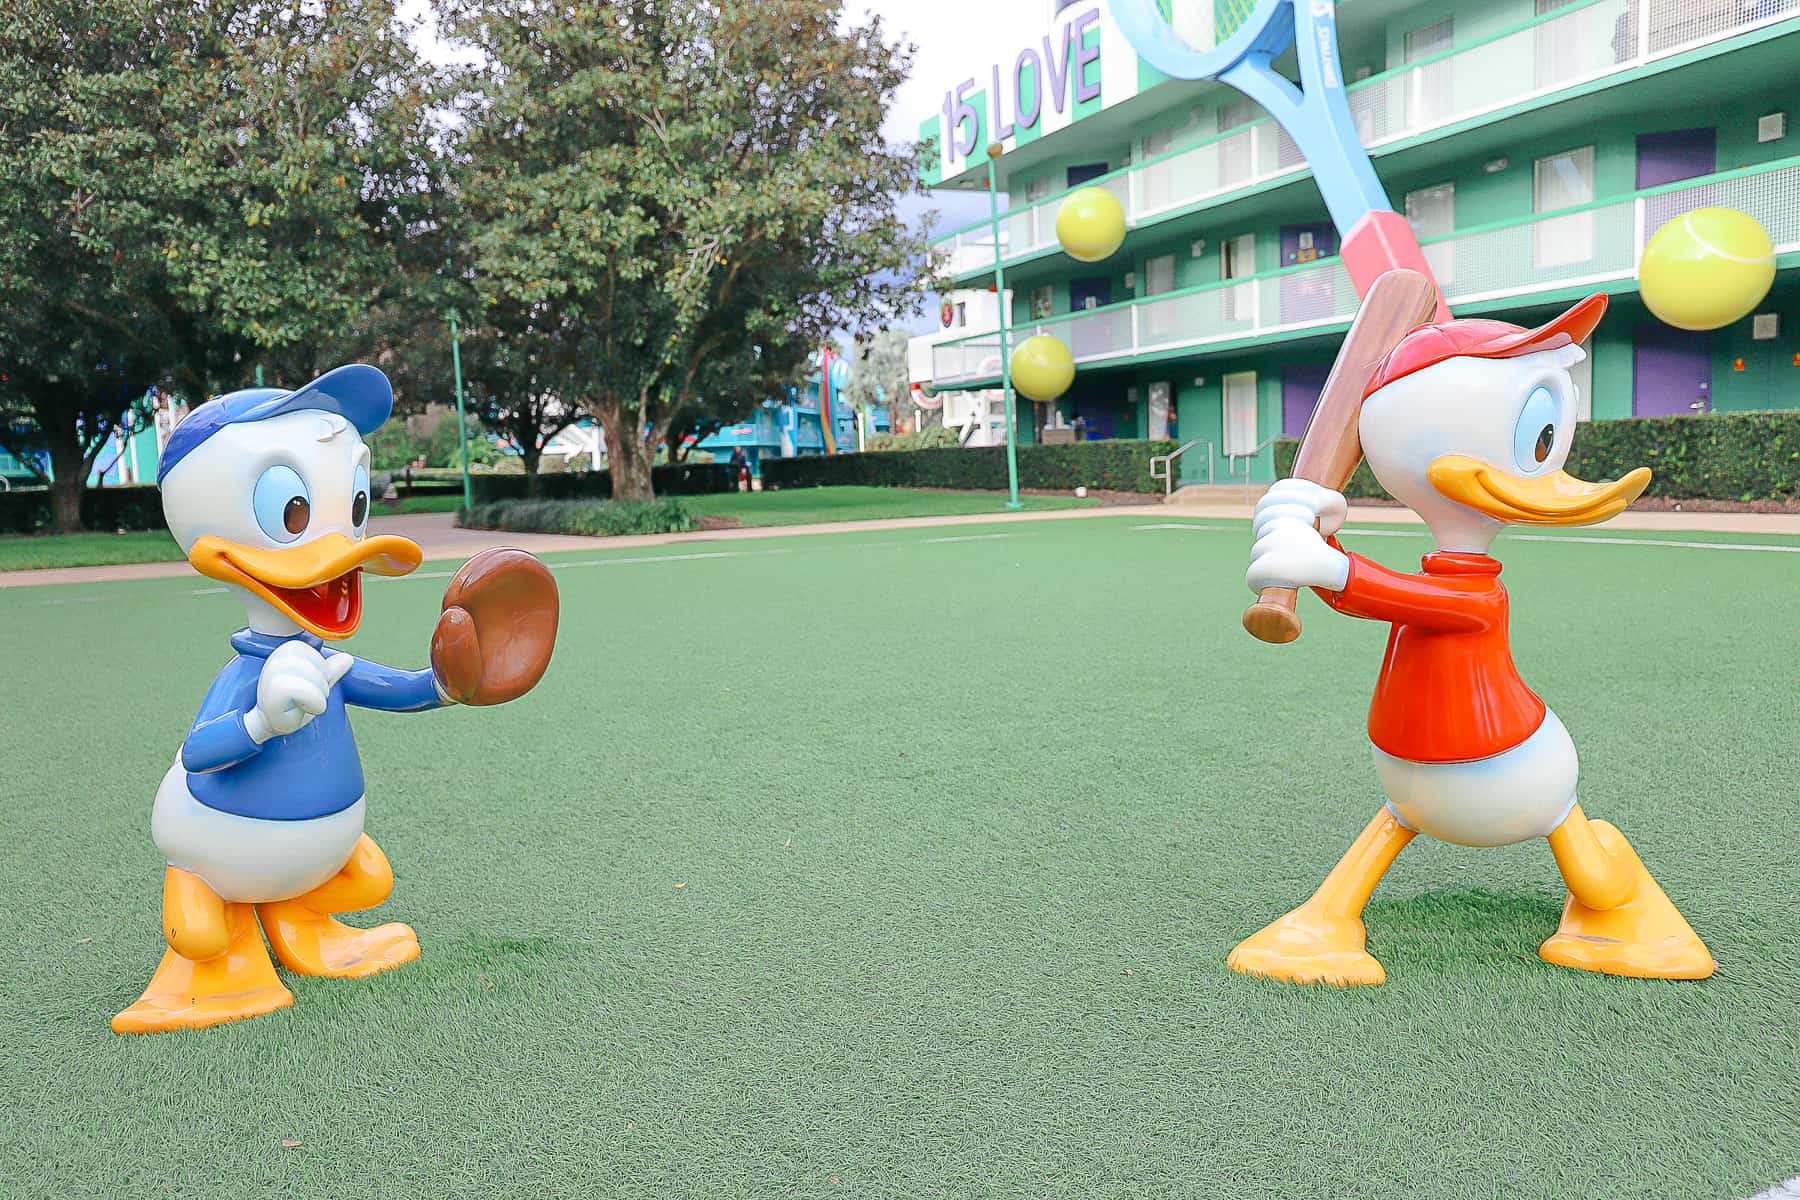 Donald's nephews playing baseball on the tennis court at All-Star Sports.